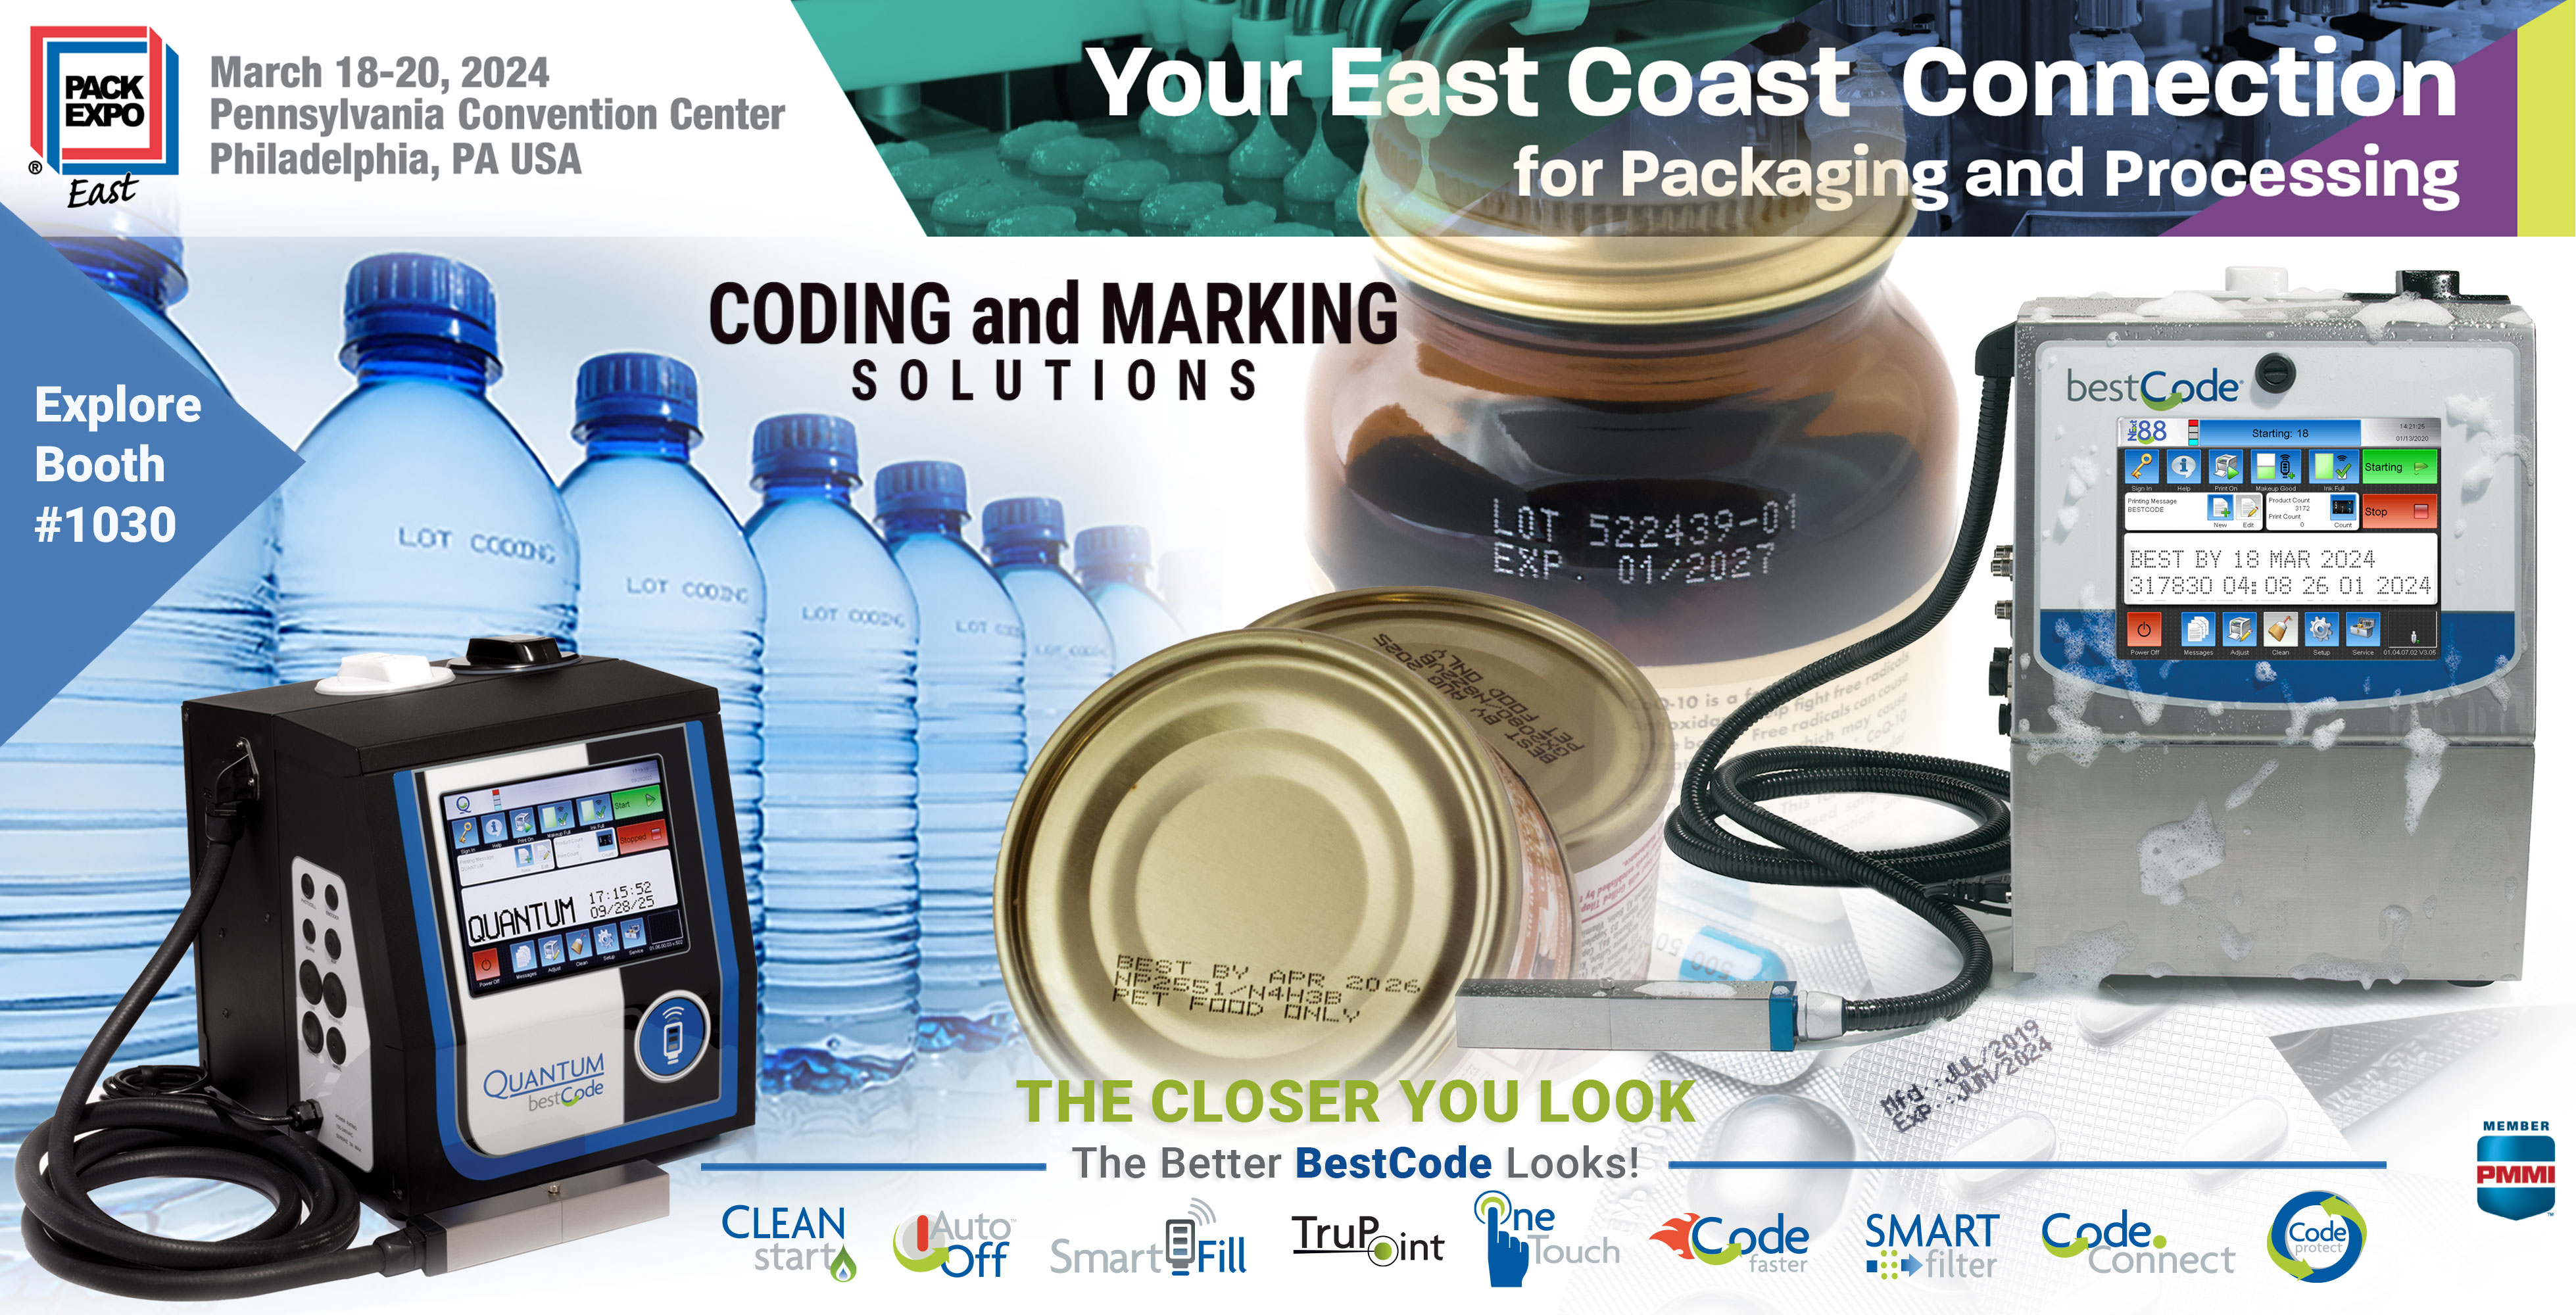 BestCode-at-Pack-Expo-East-24